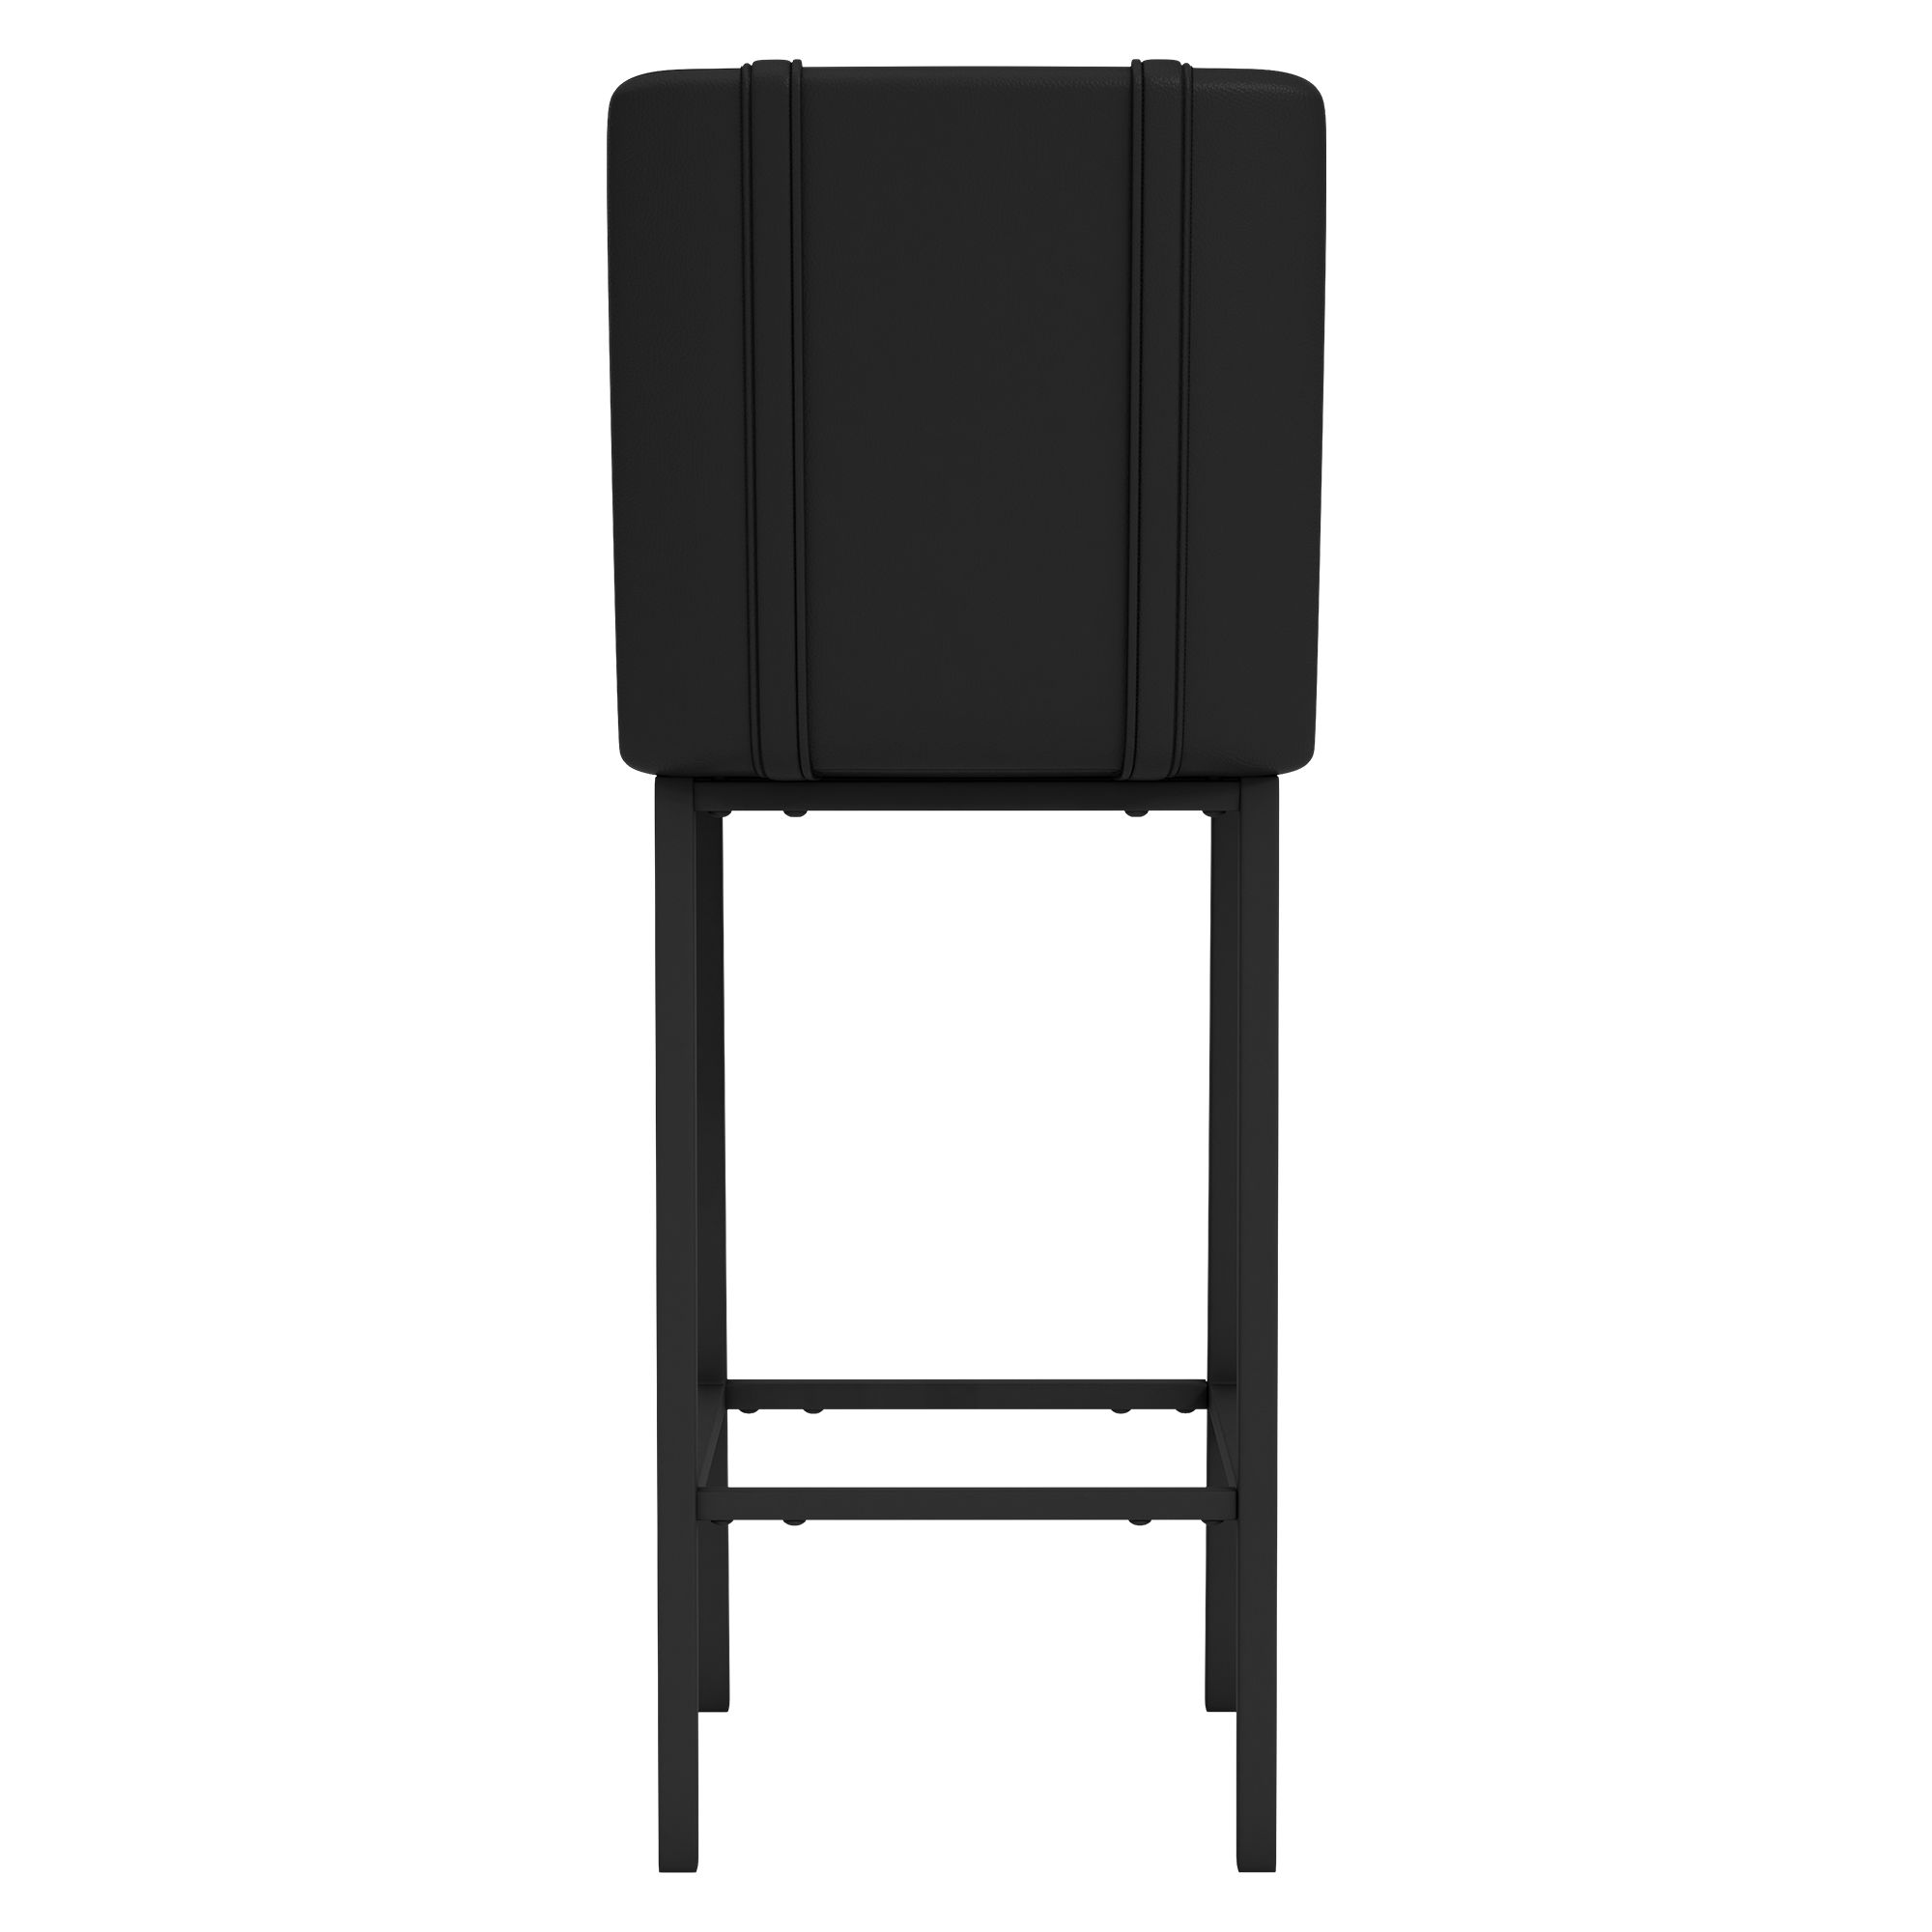 Bar Stool 500 with San Diego Padres Cooperstown Set of 2